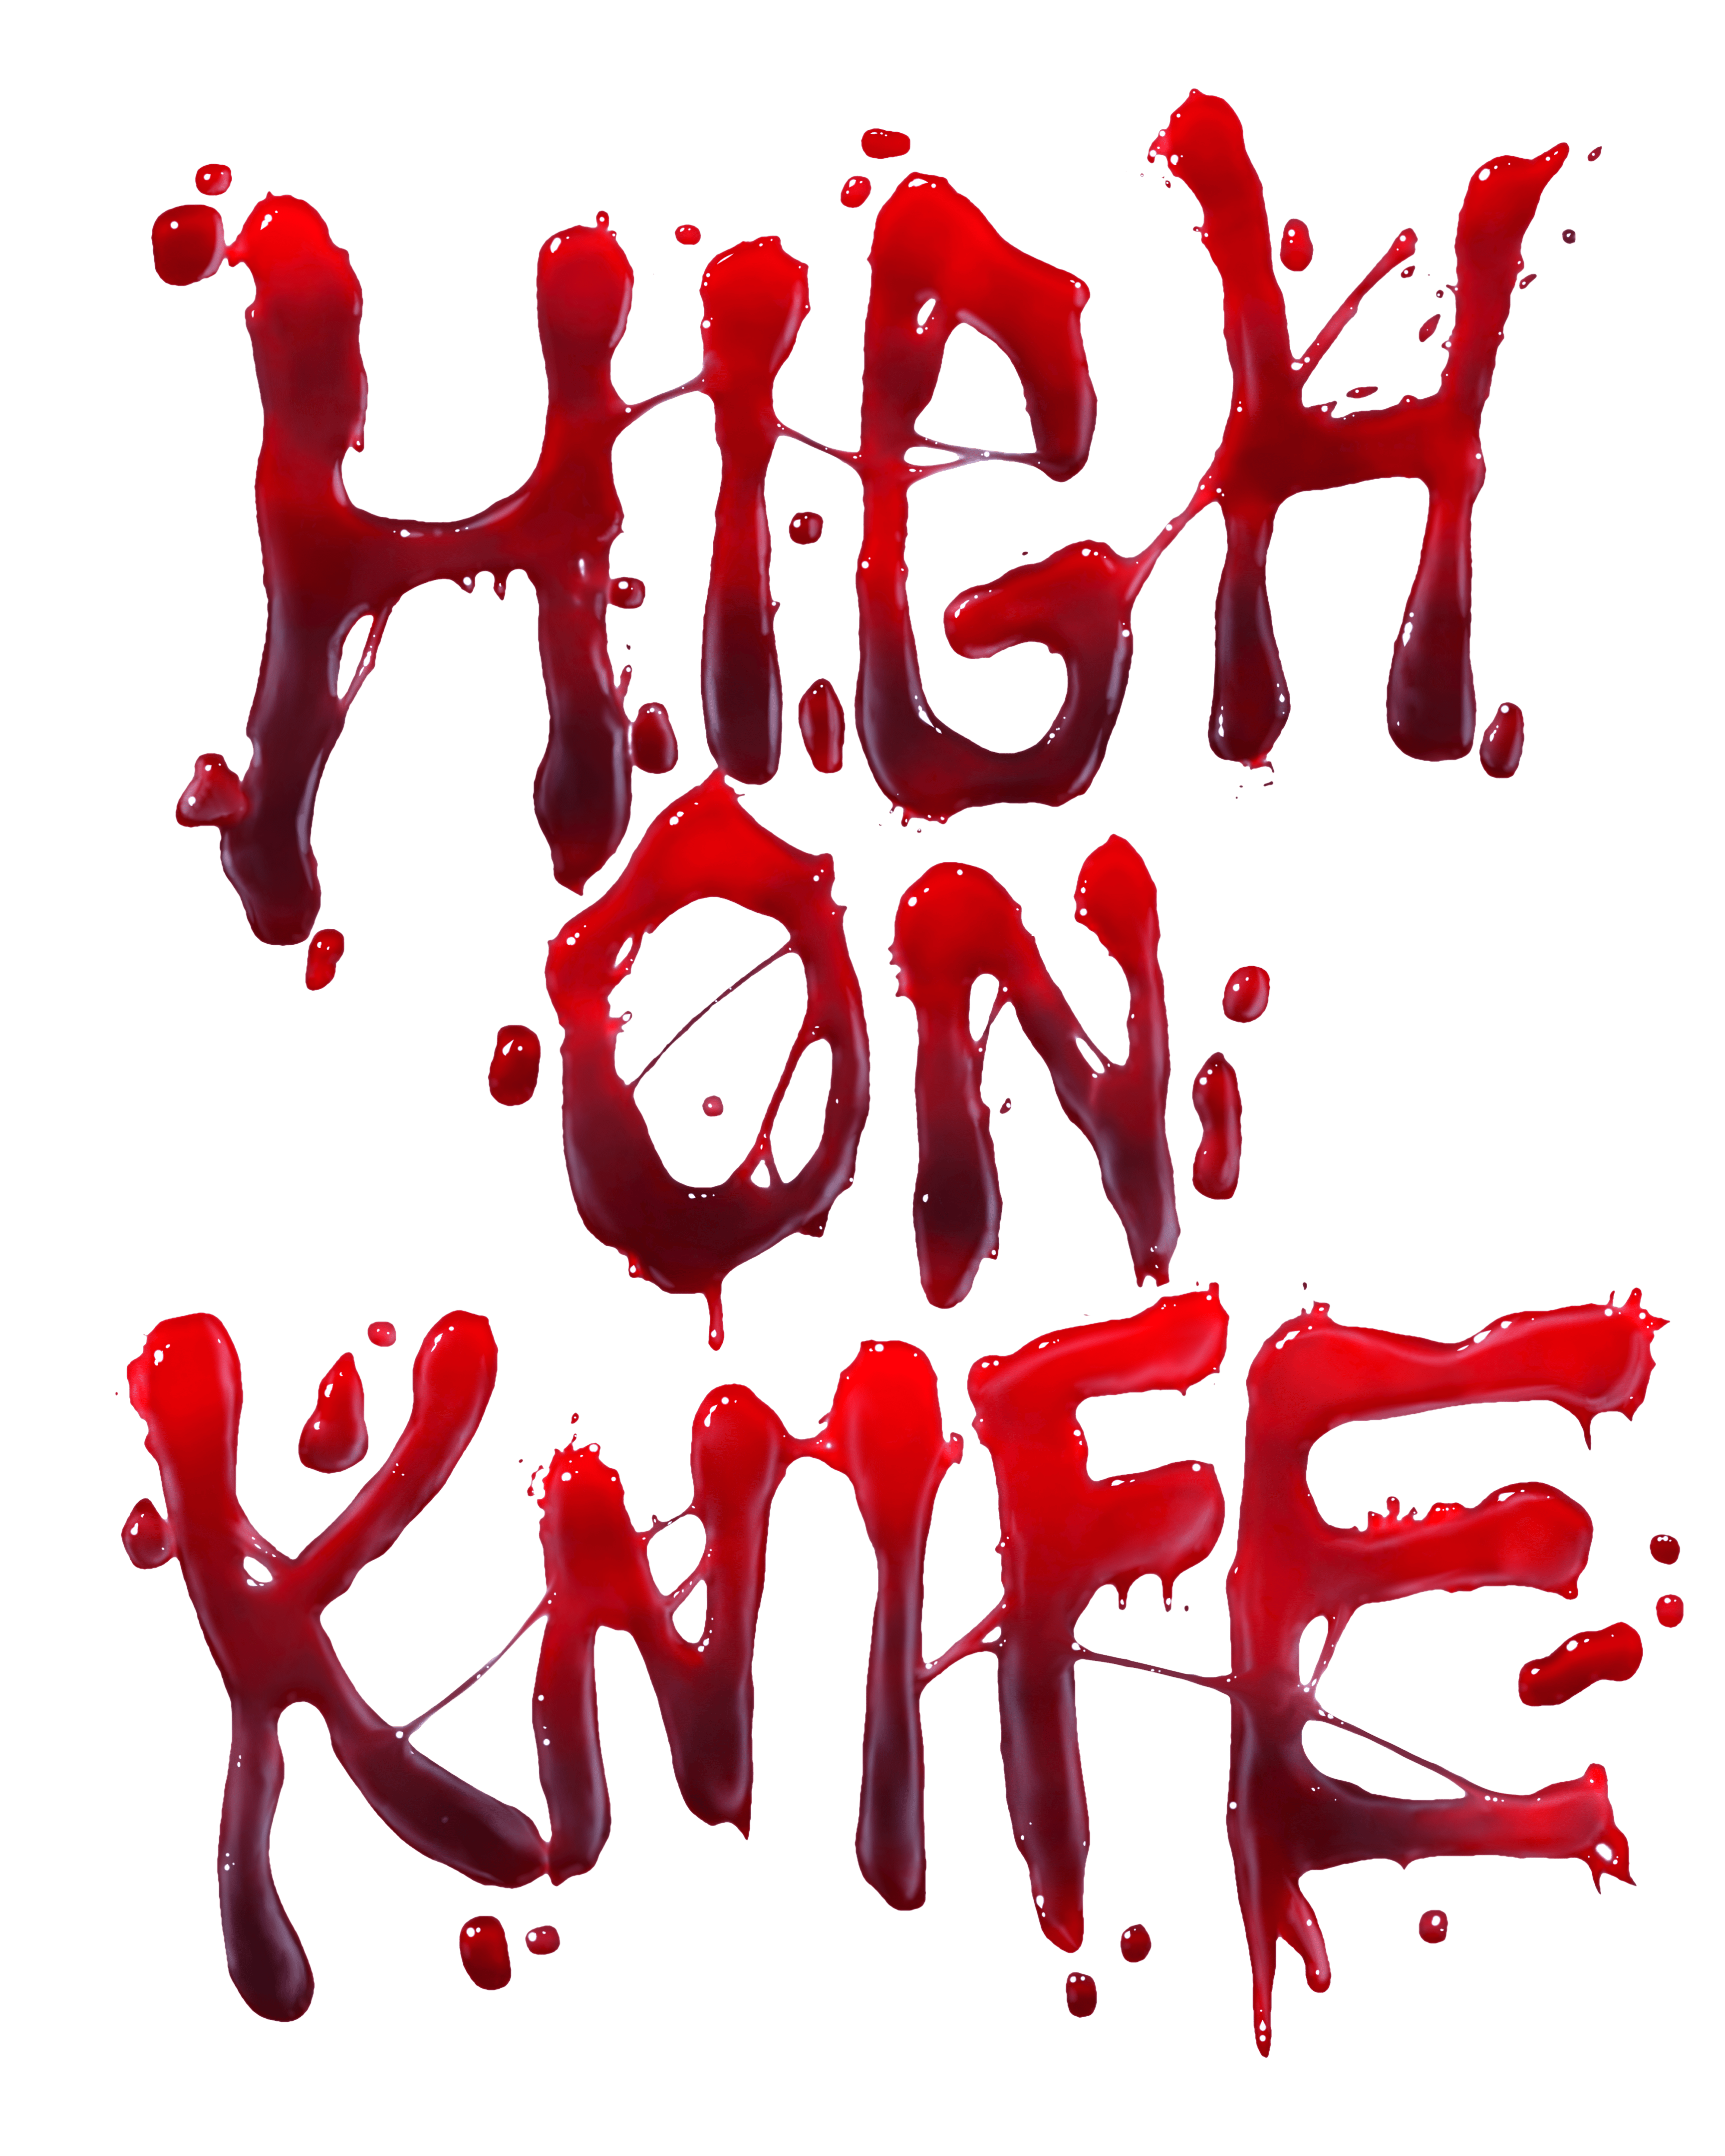 How long is the High on Knife DLC?